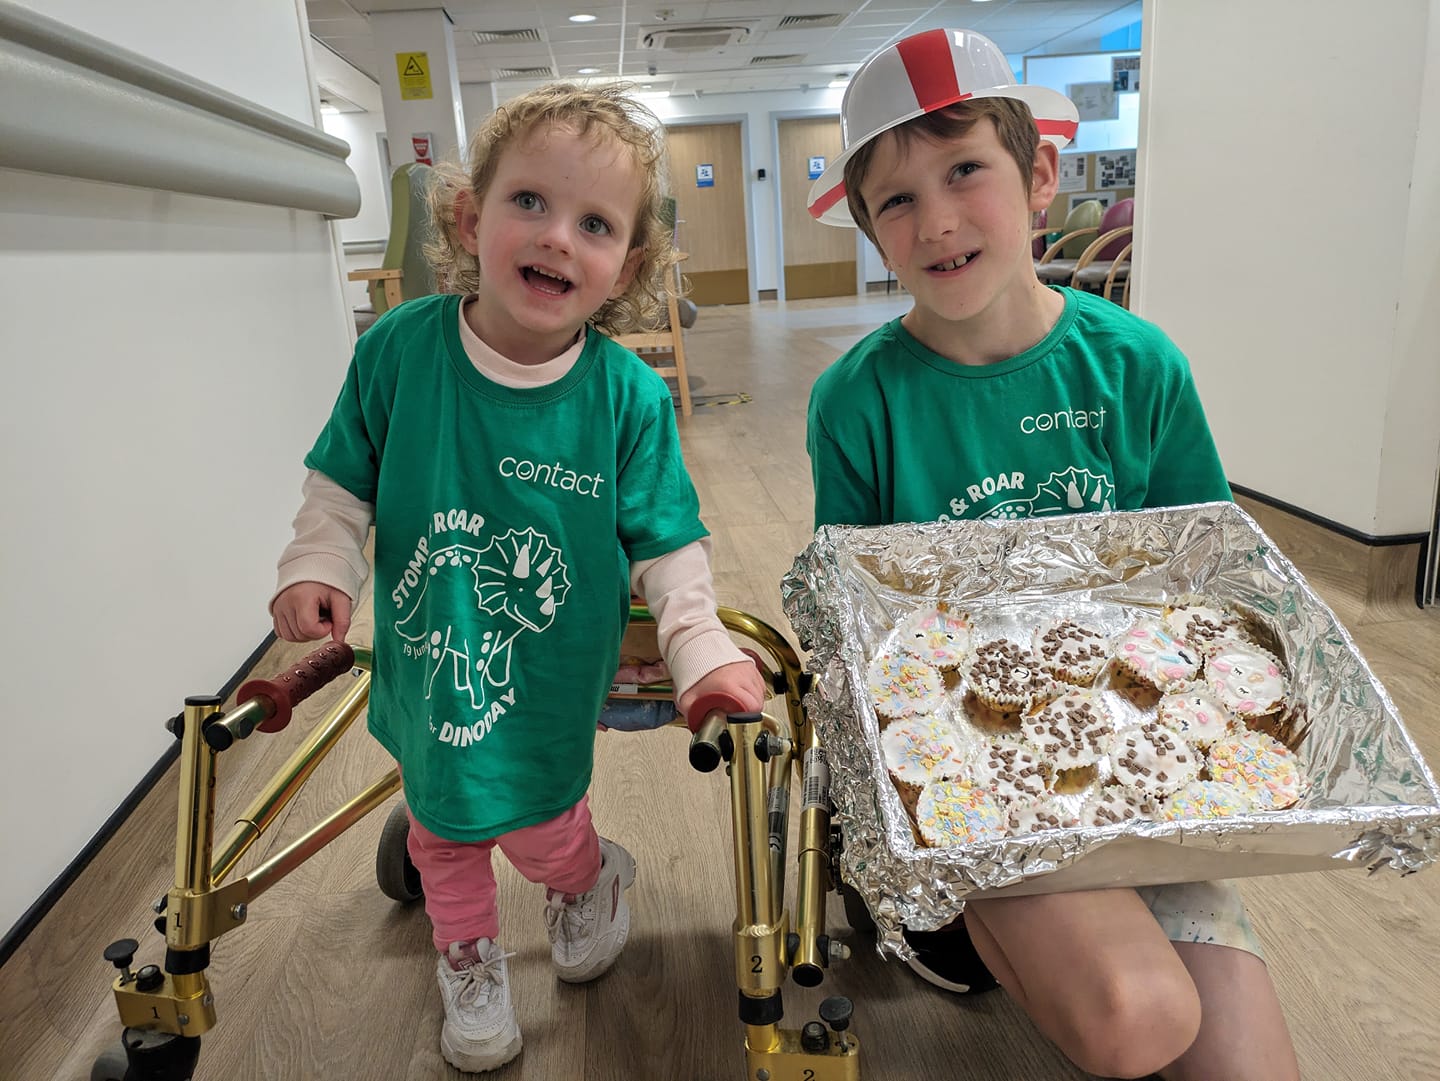 Two young siblings in green t-shirts posing with a box of cupcakes at their local hospital